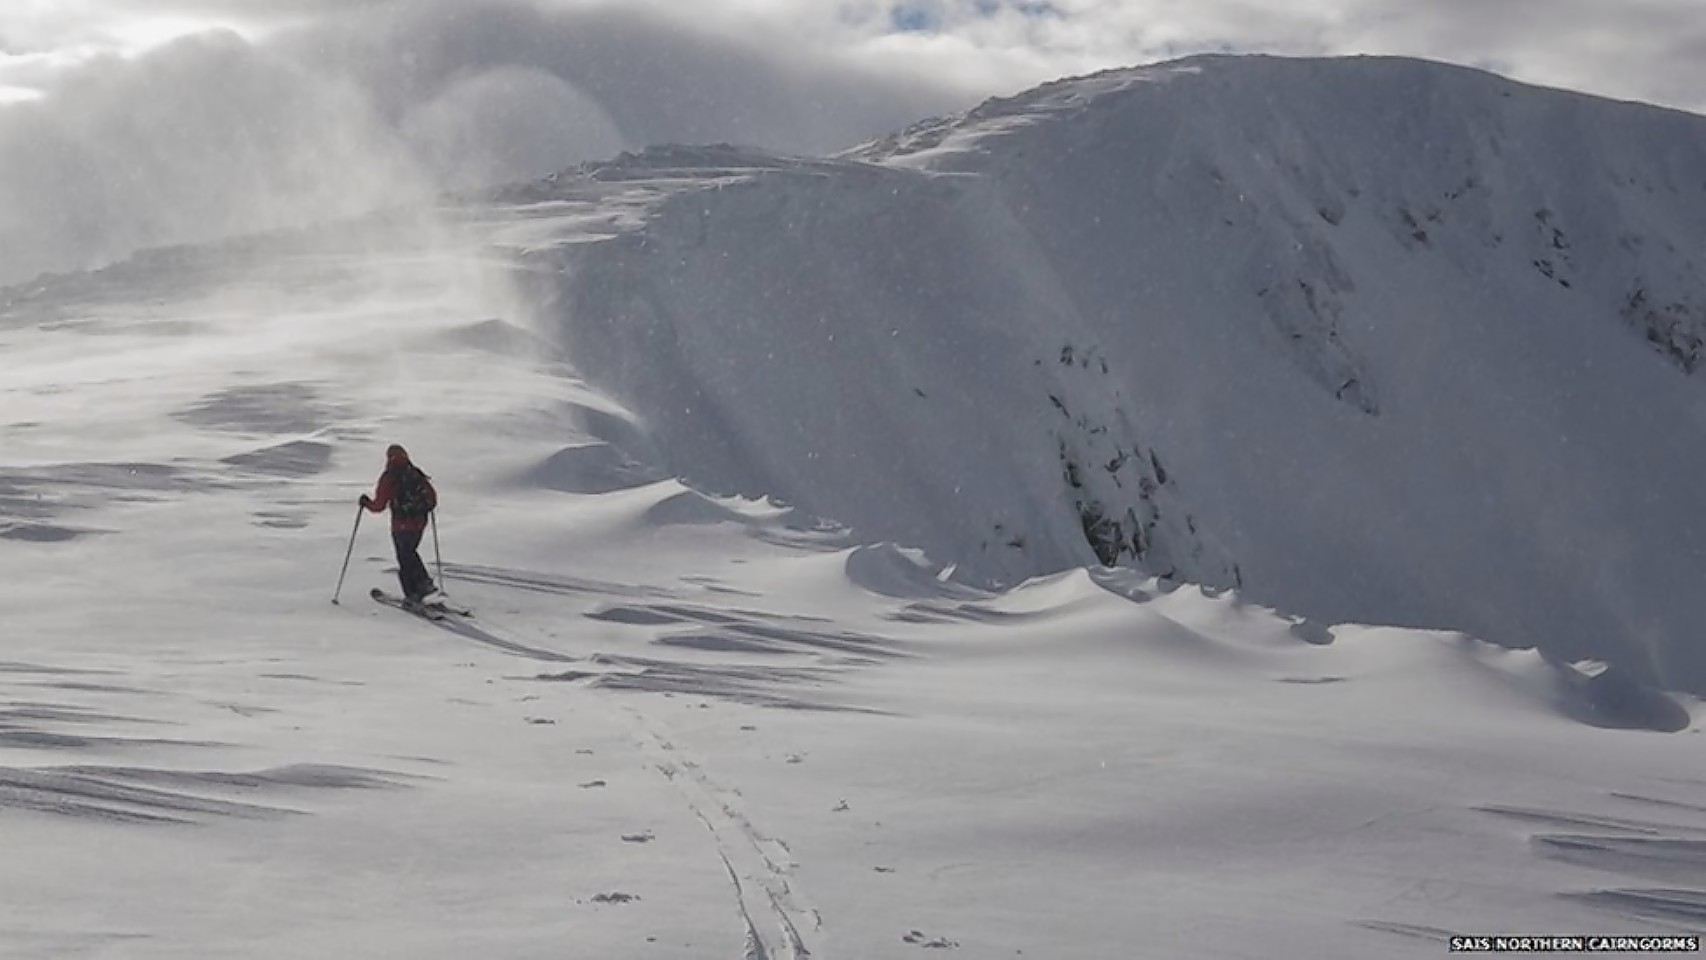 Mountaineers have been warned of hazardous conditions in the Scottish mountains